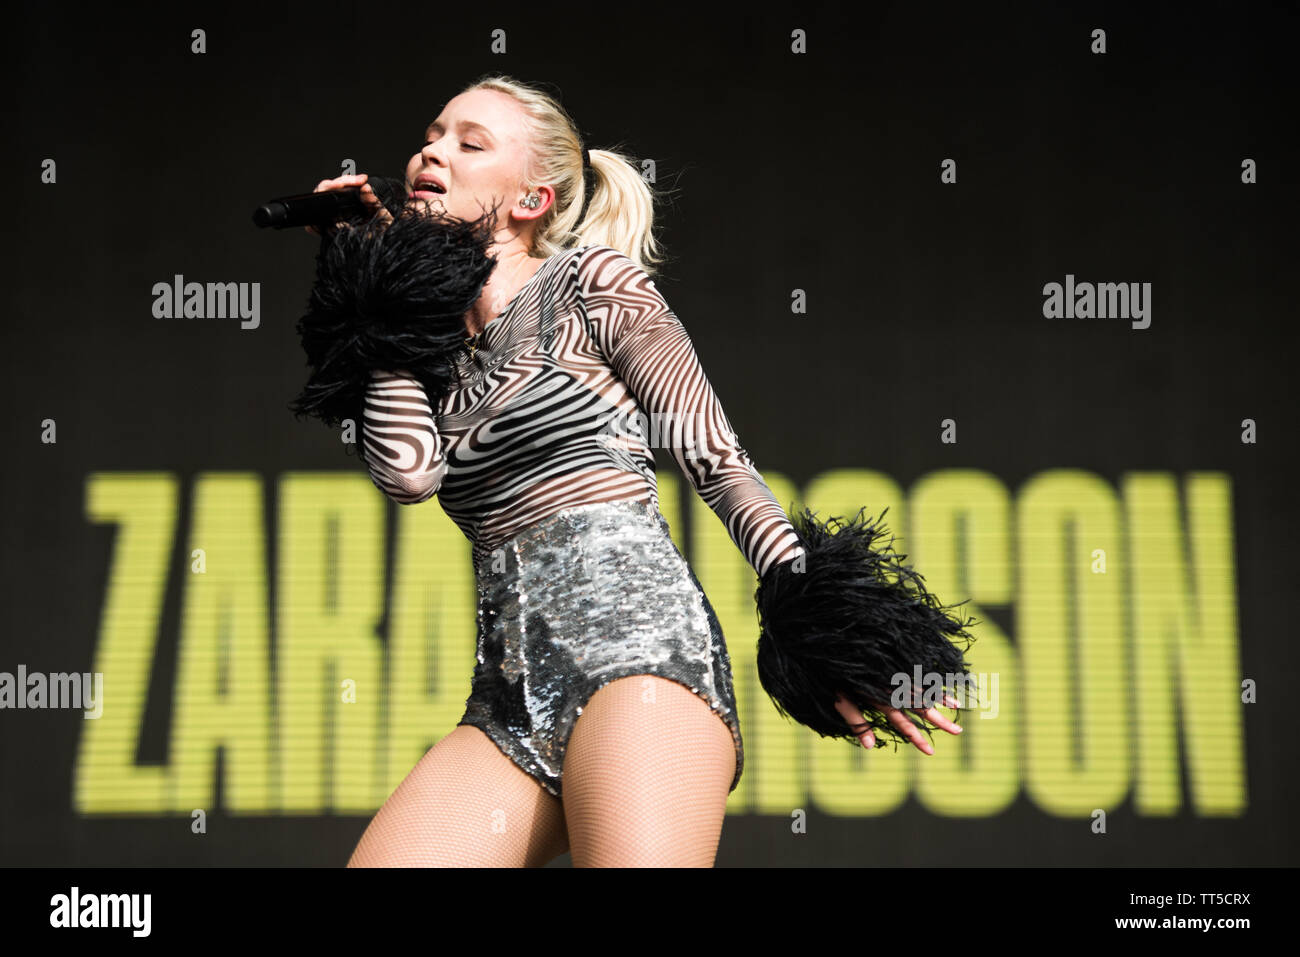 The Swedish singer Zara Larsson performing live on stage at the Firenze  Rocks festival 2019 in Florence, Italy, opening for Ed Sheeran Stock Photo  - Alamy